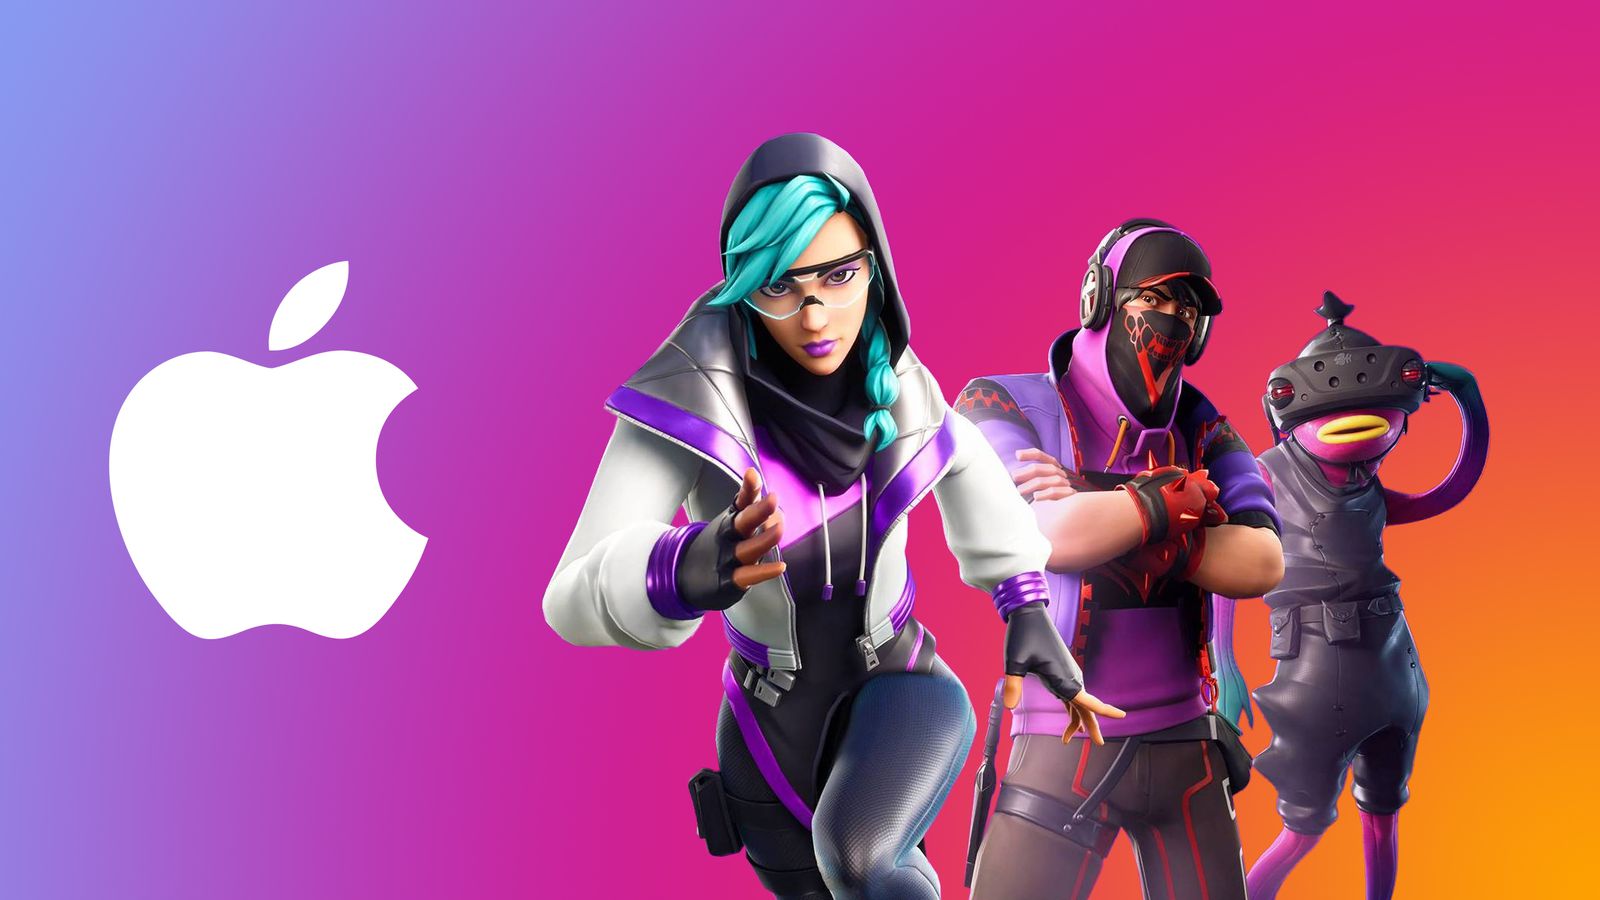 Epic Games Loses Again in Battle With Apple Over App Store Rules - MacRumors